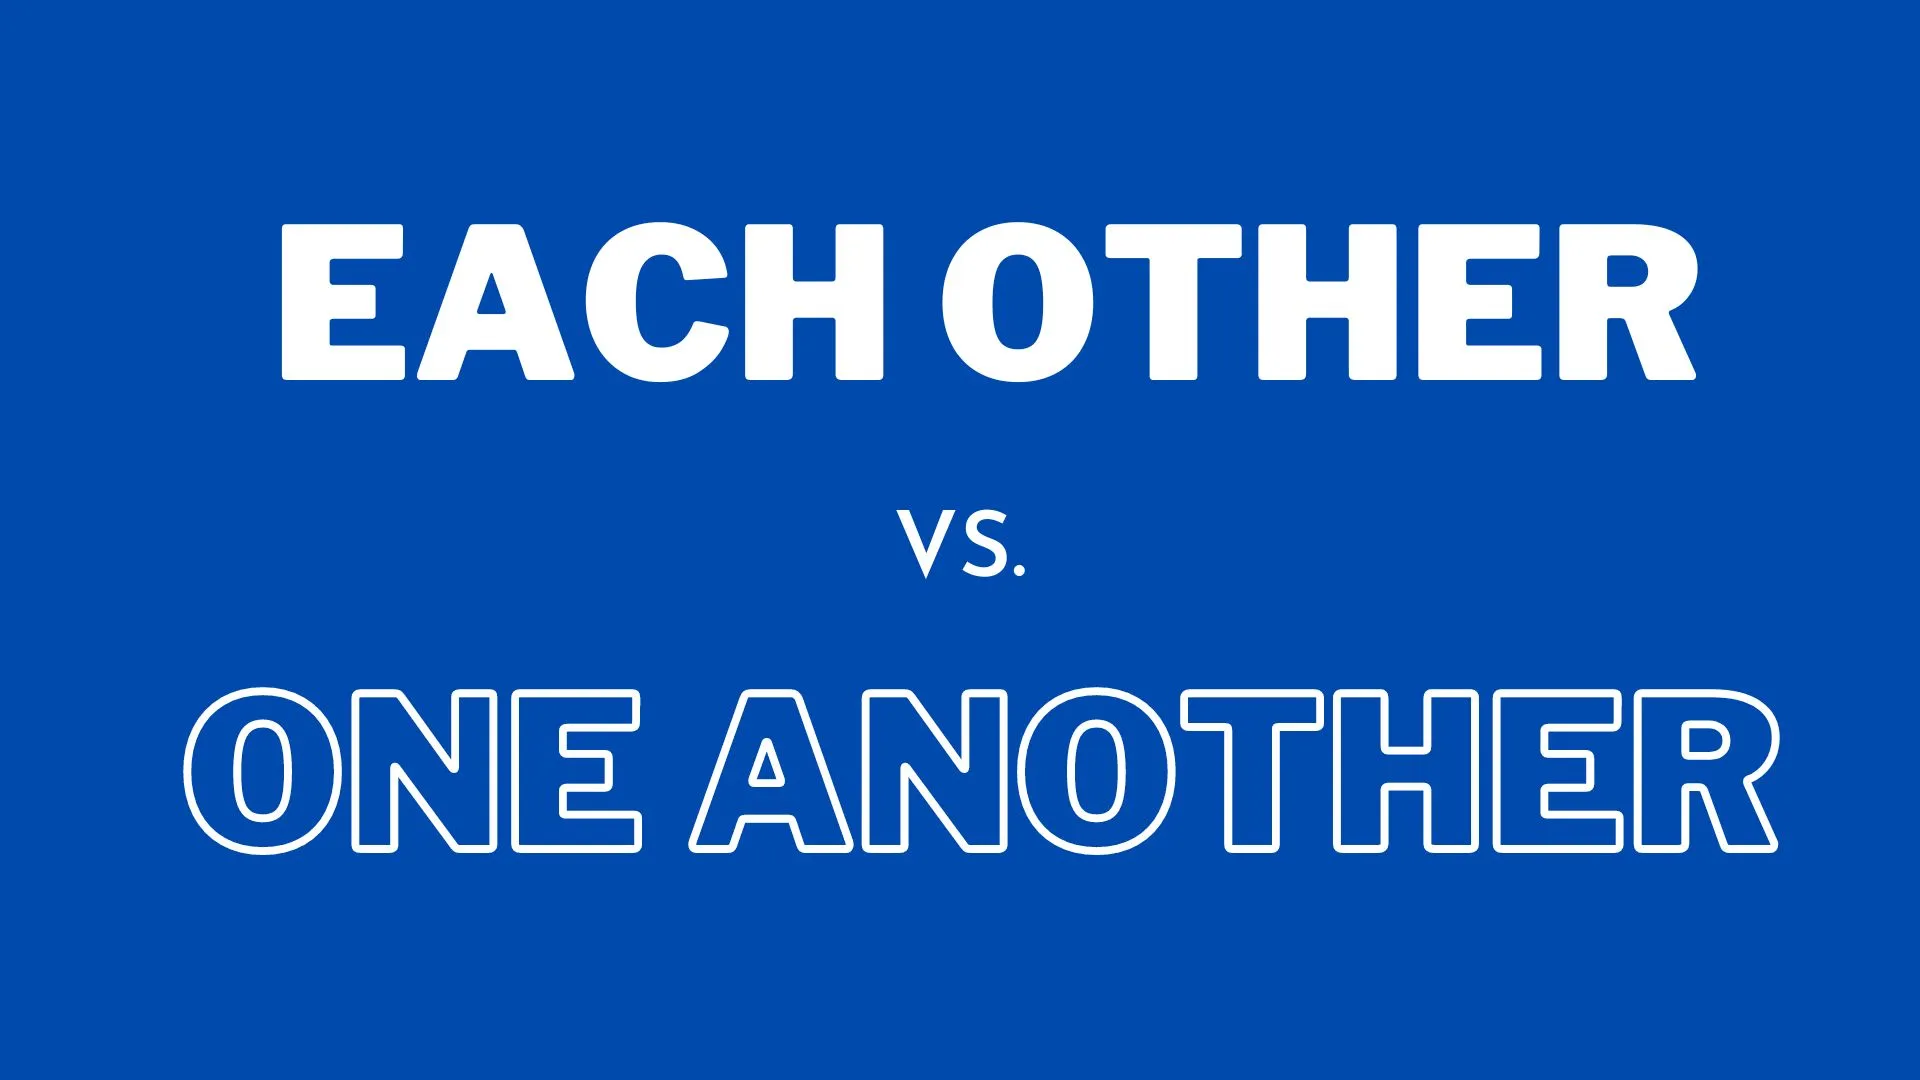 Illustration depicting the difference between "each other" and "one another" in English grammar for English teachers and learners.